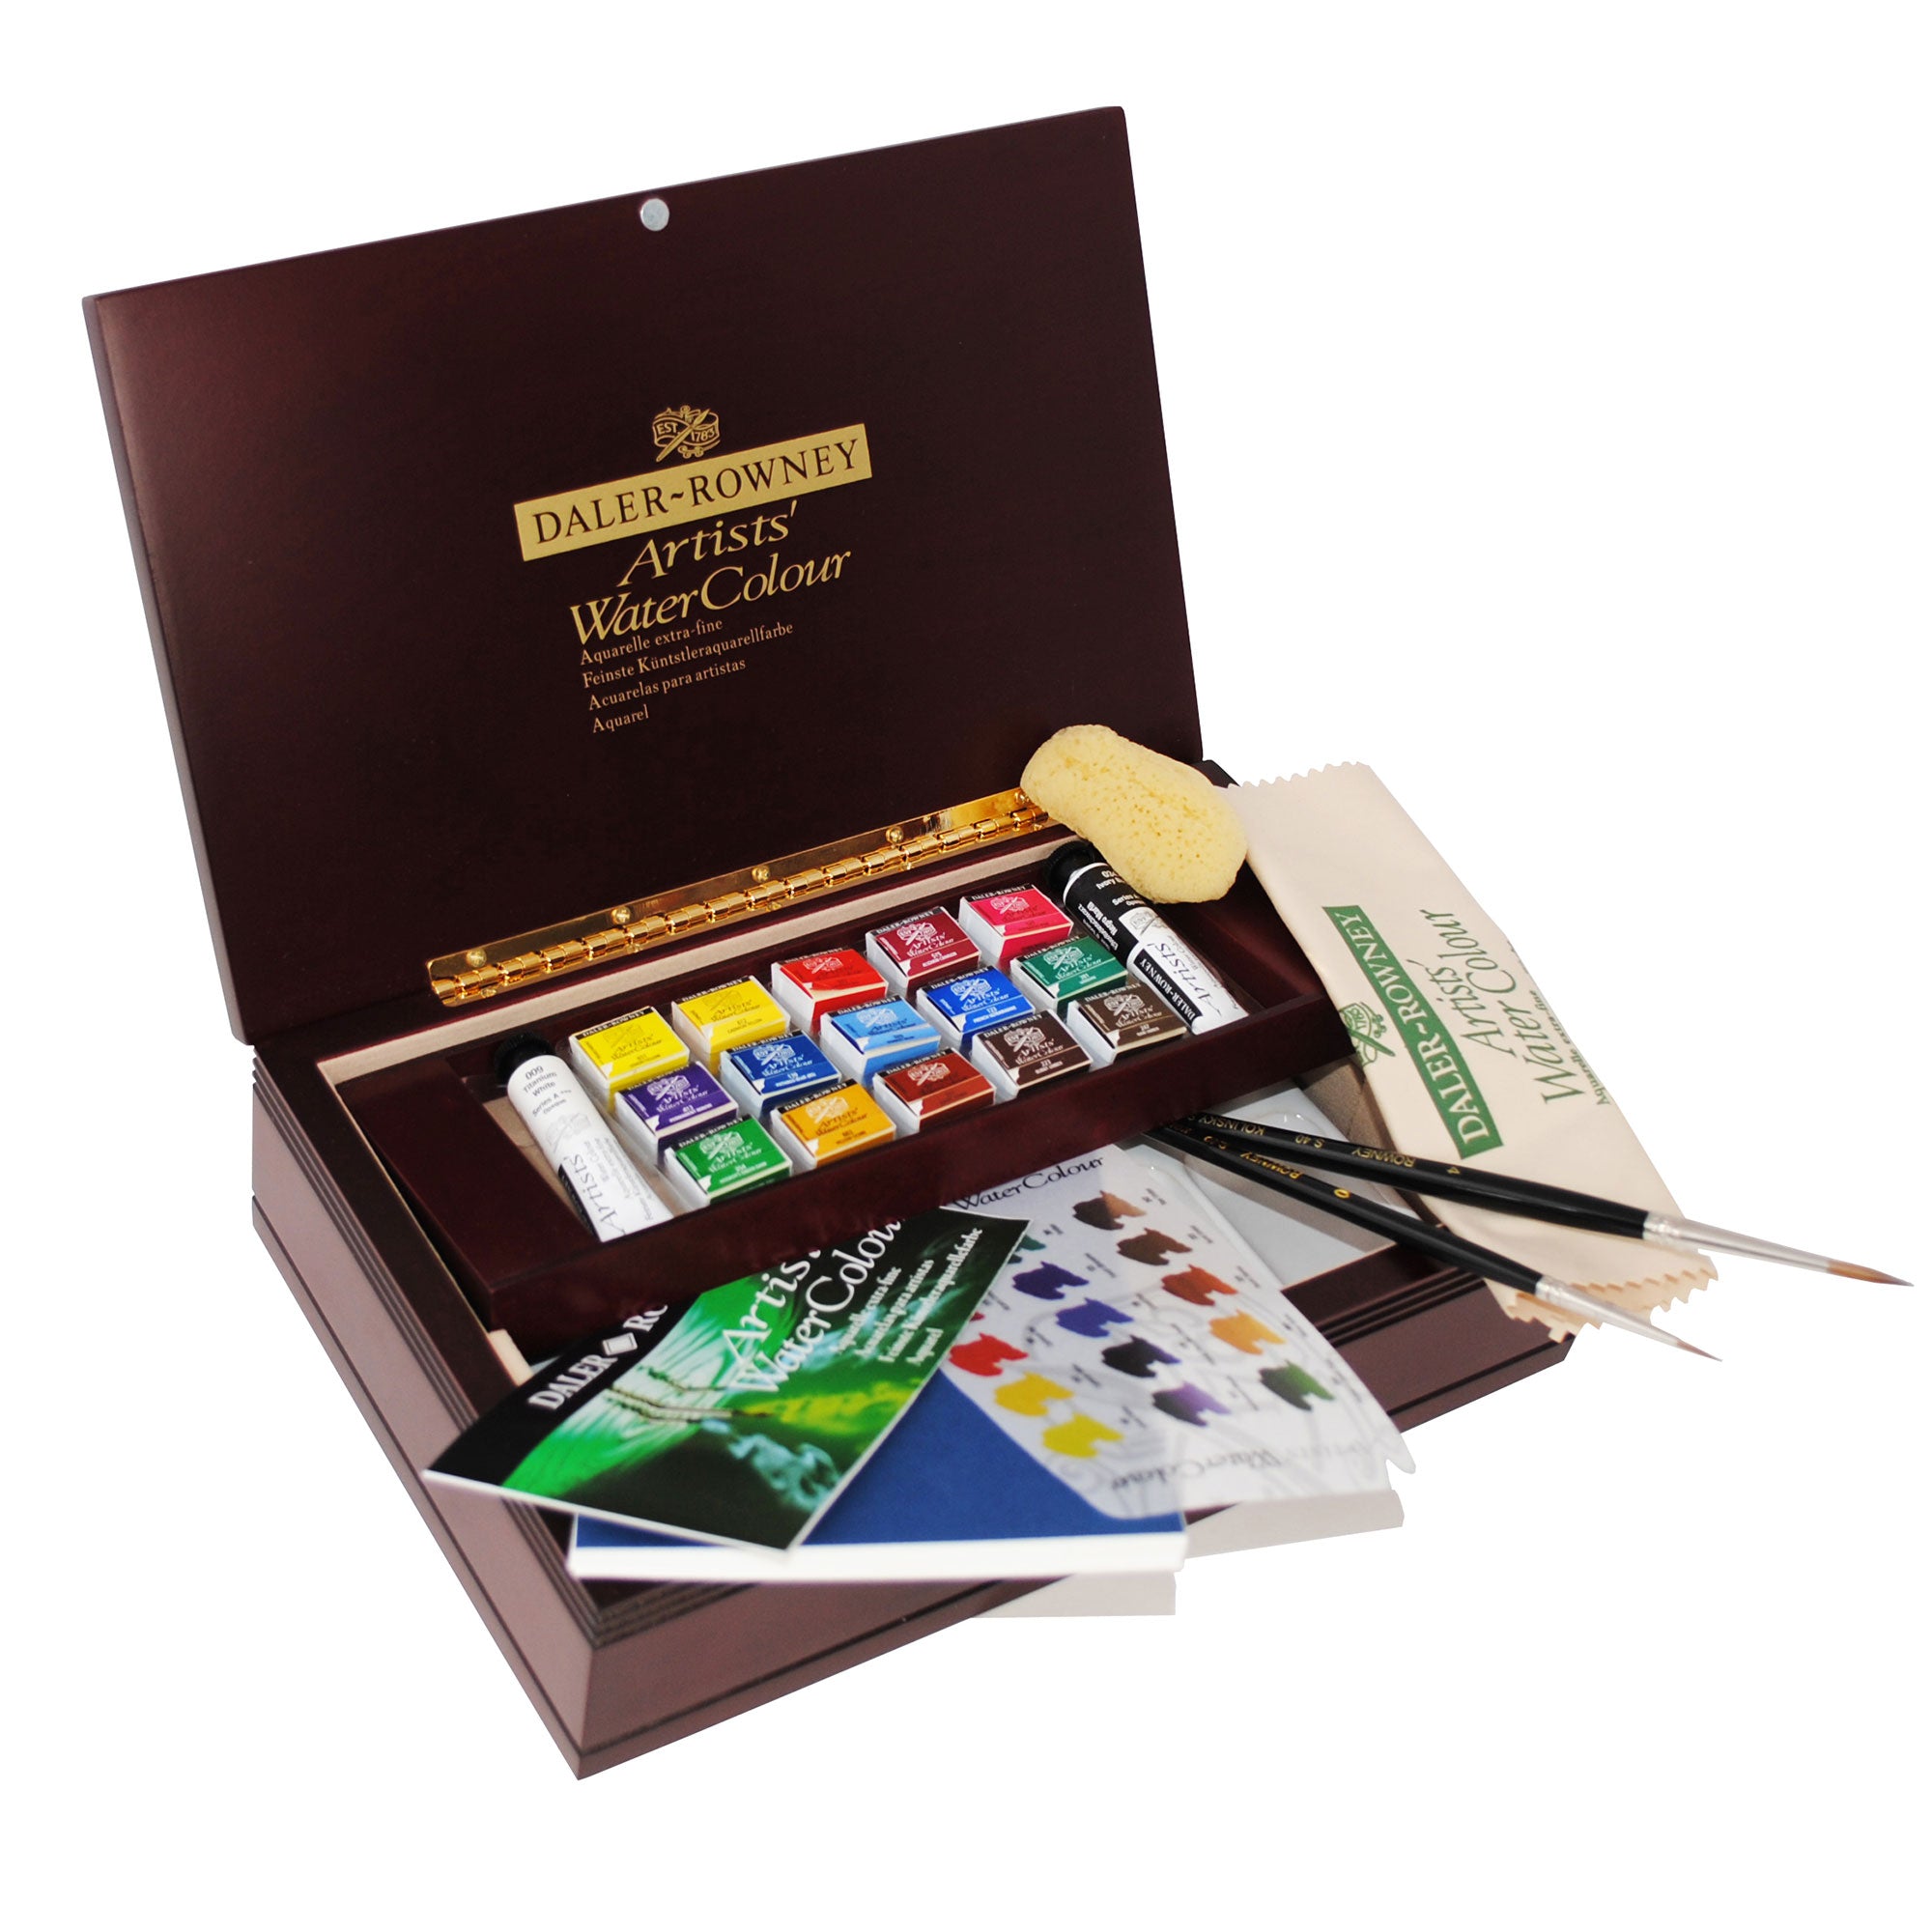 Daler-Rowney Artists Watercolour Half Pan Deluxe Wooden Box Set - Professional Quality, box open